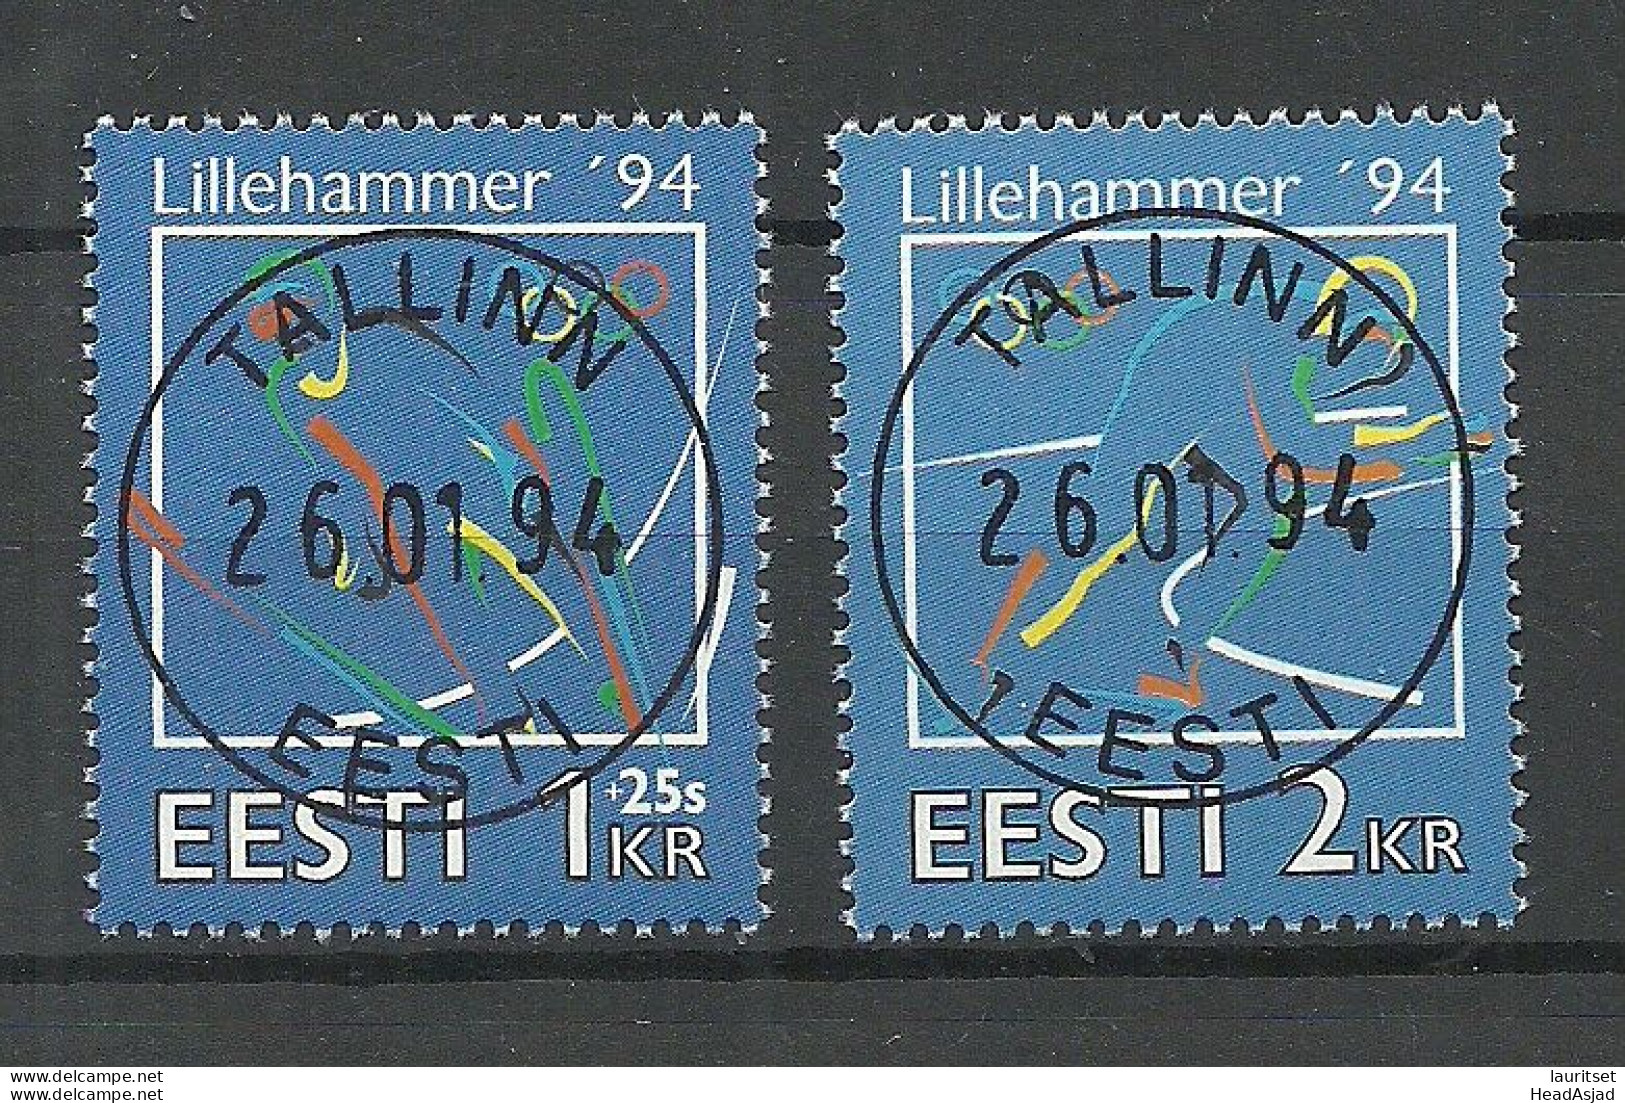 ESTLAND Estonia 1994 Michel 221 - 222 Olympic Games Olympische Spiele Lillehammer Norway O Perfect Cancels - Winter 1994: Lillehammer